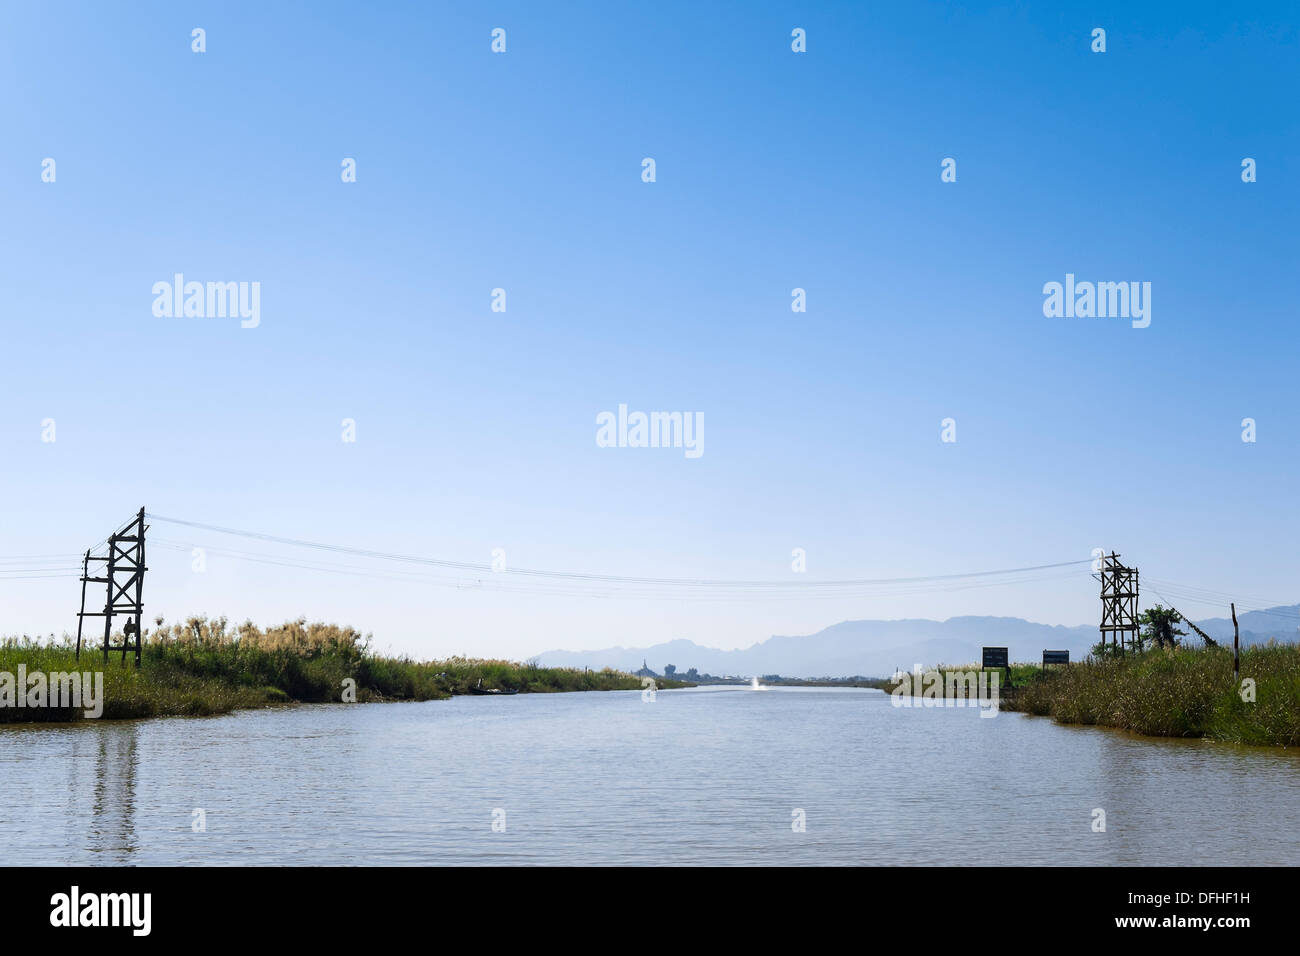 Power line across a canal at Inle Lake, Myanmar, Asia Stock Photo